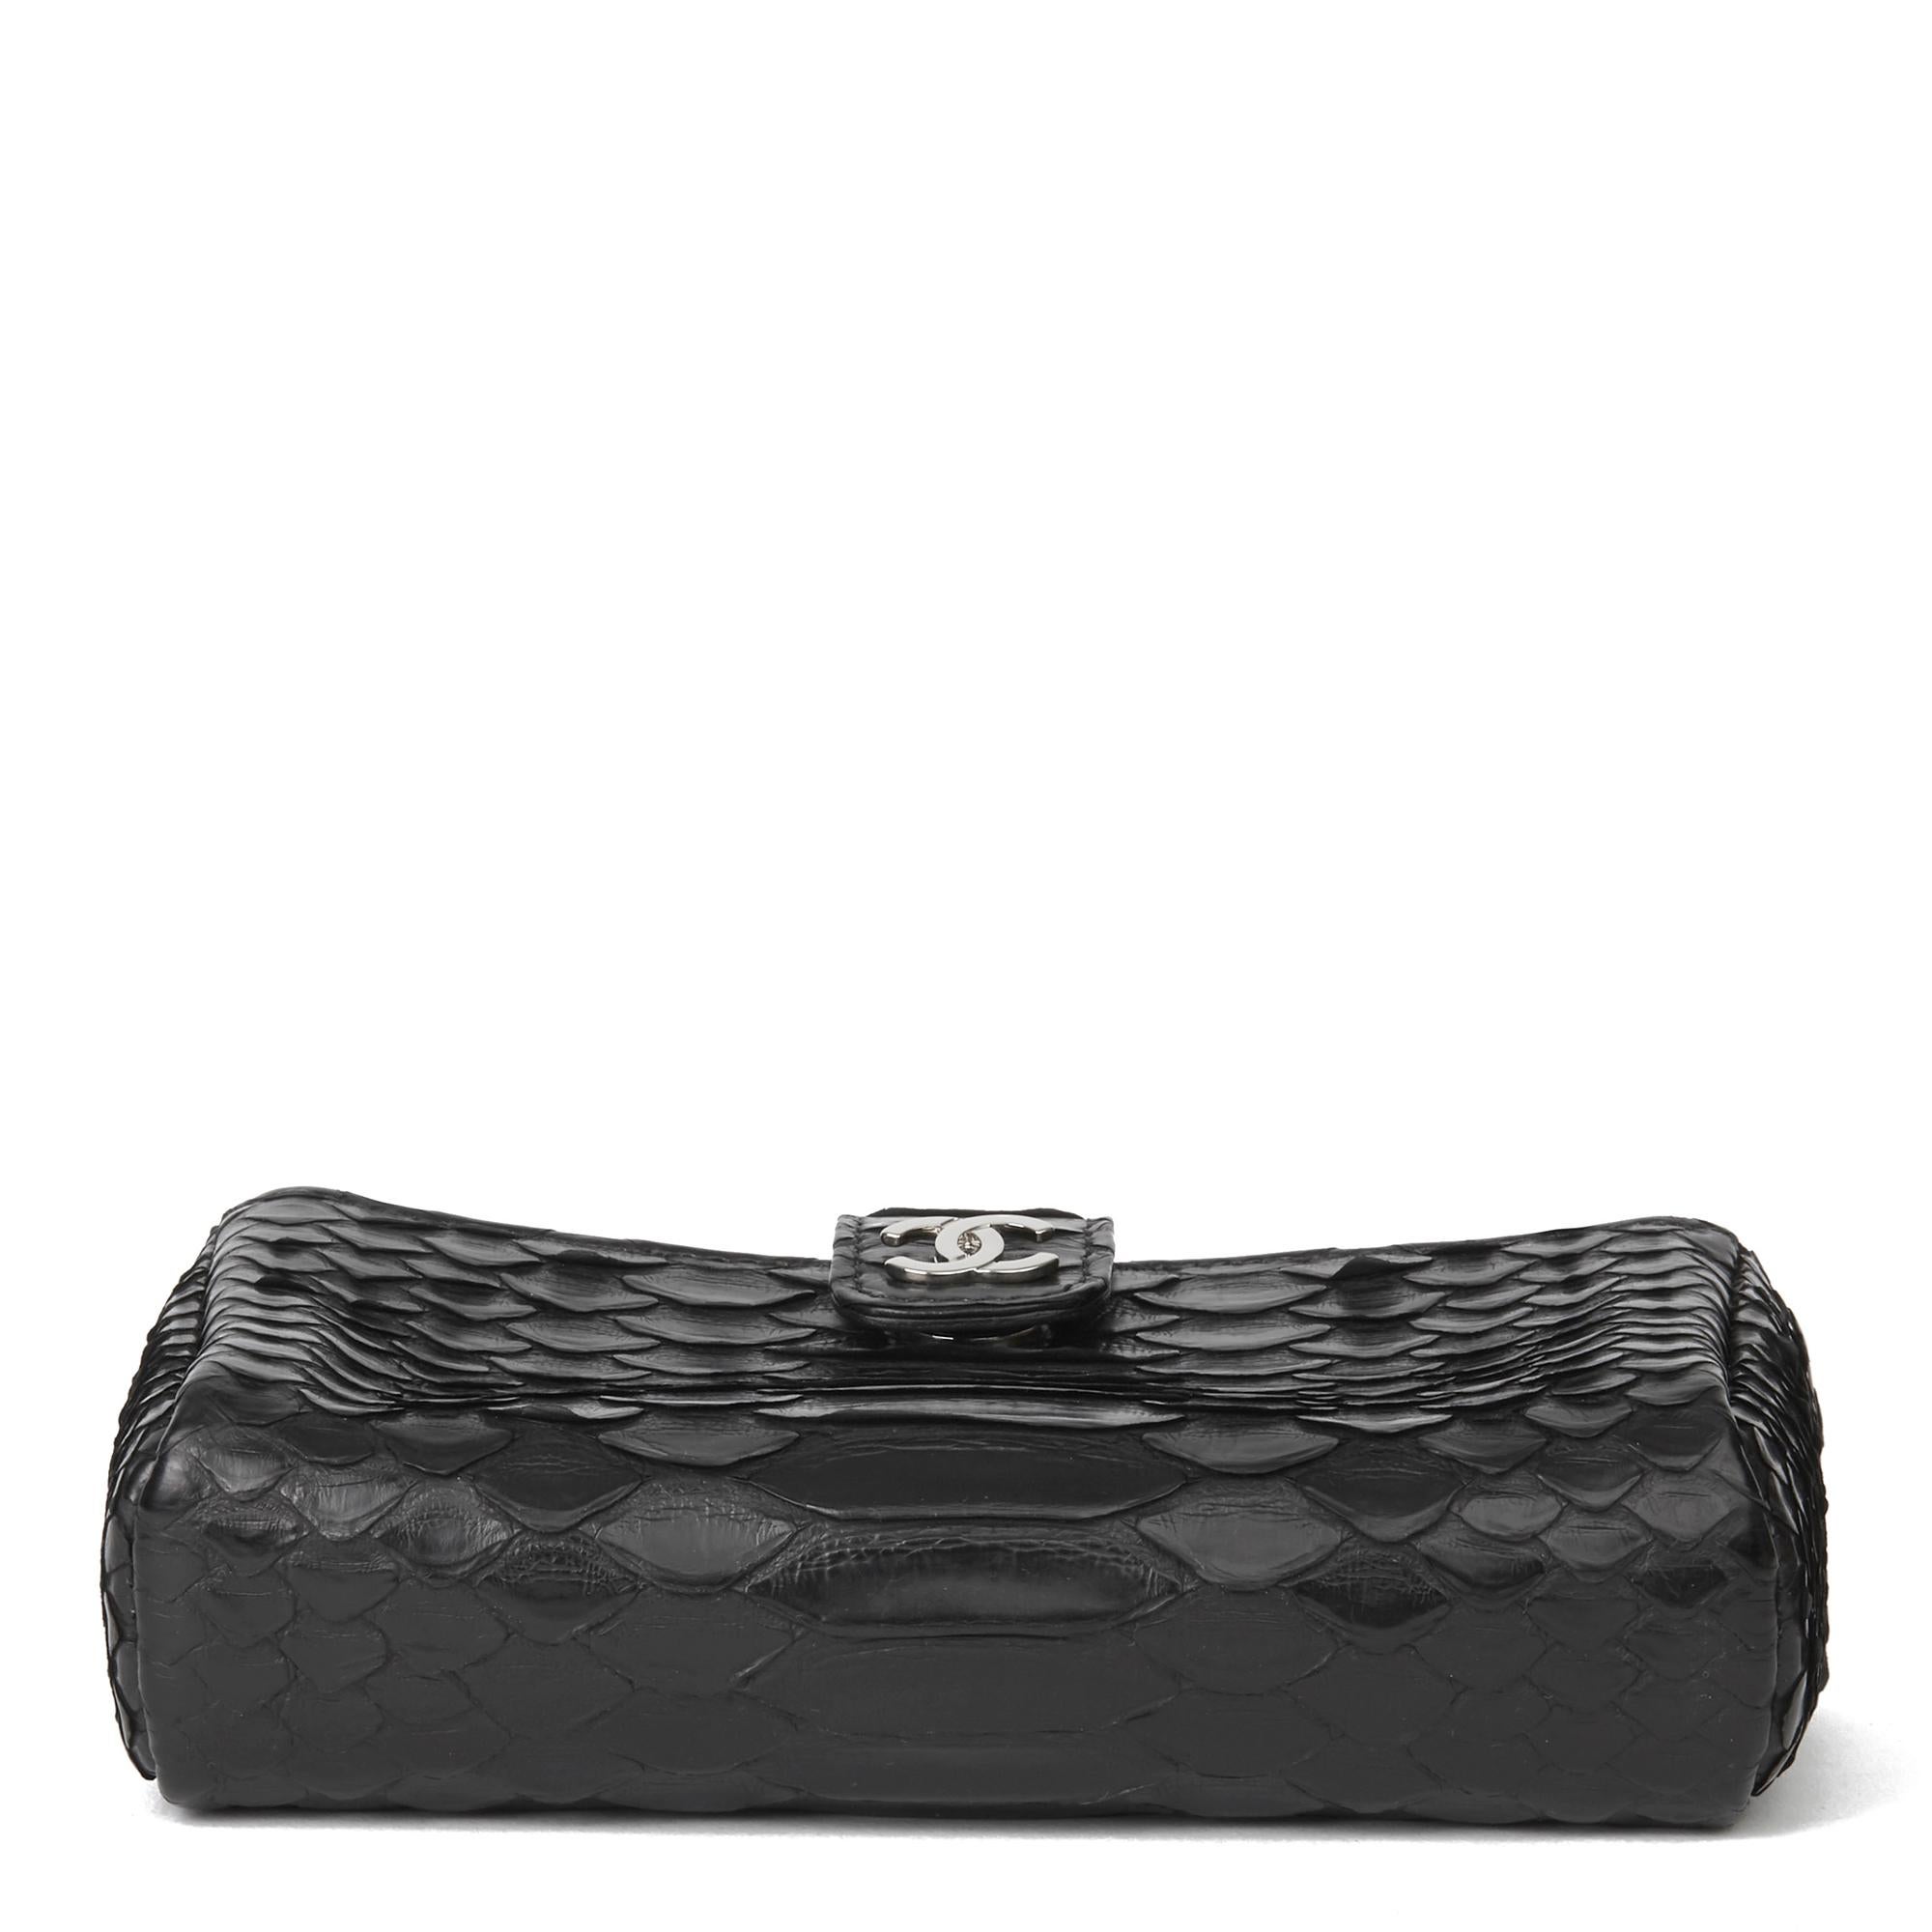 2015 Chanel Black Python Leather Pouch-on-Chain POC 1